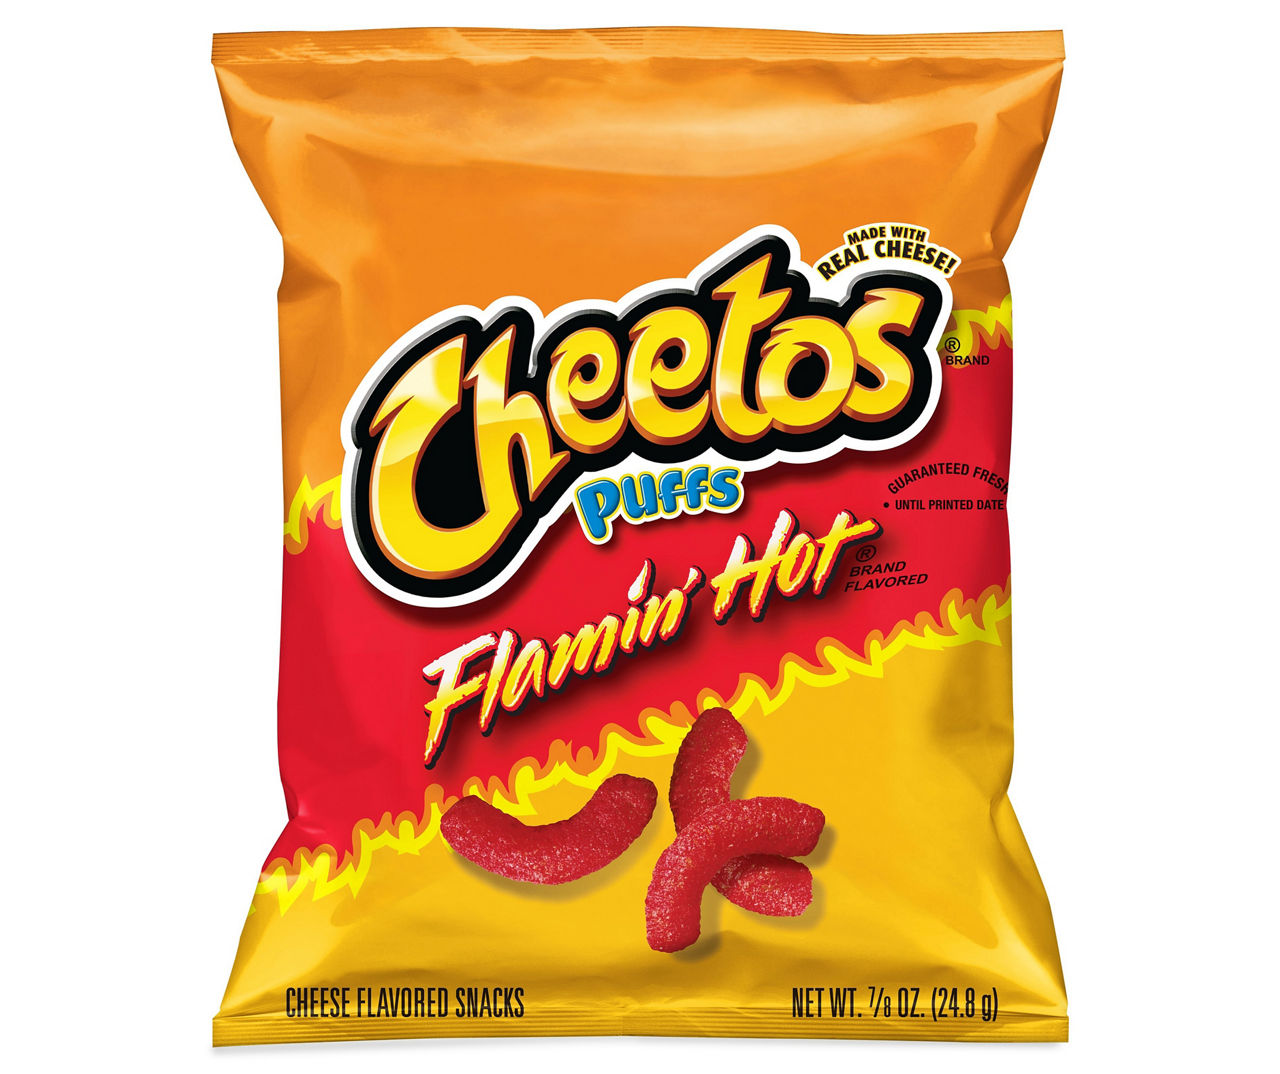 Flamin' Hot Cheetos Facts - 8 Things to Know About Flaming Hot Cheeto Puffs